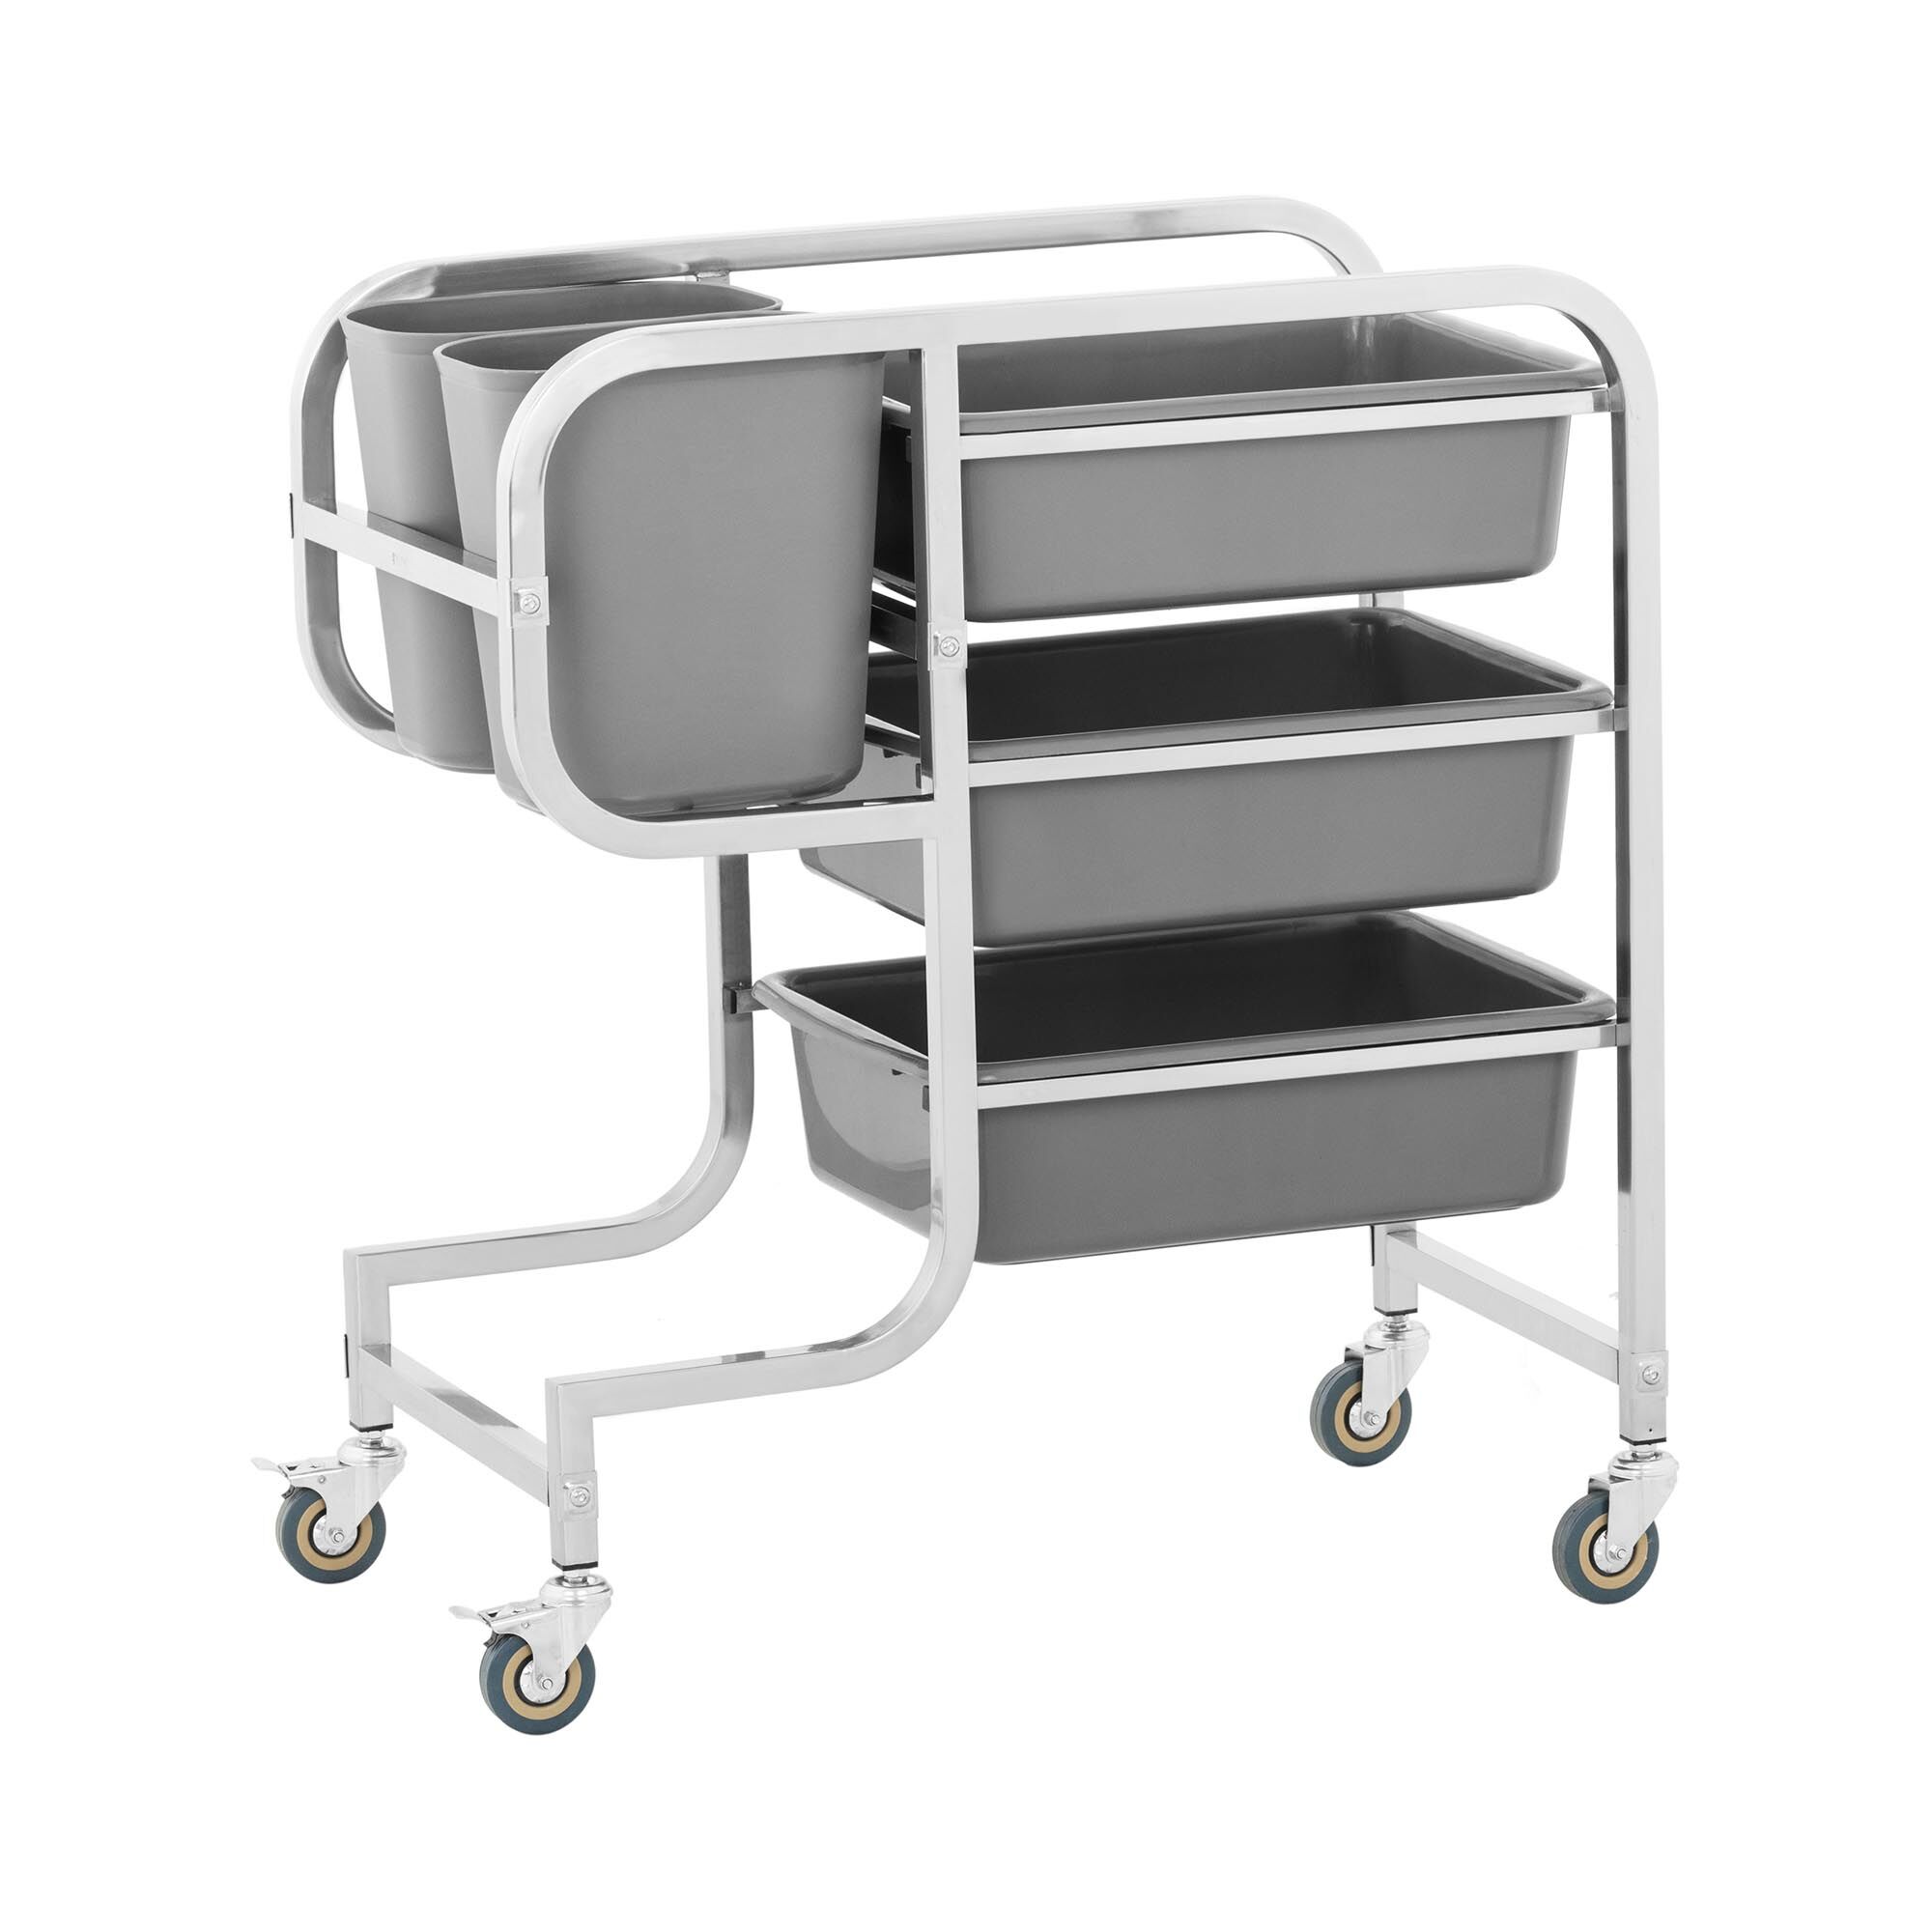 Royal Catering Bus Cart - 3 bus tubs - 2 rubbish bins - up to 100 kg